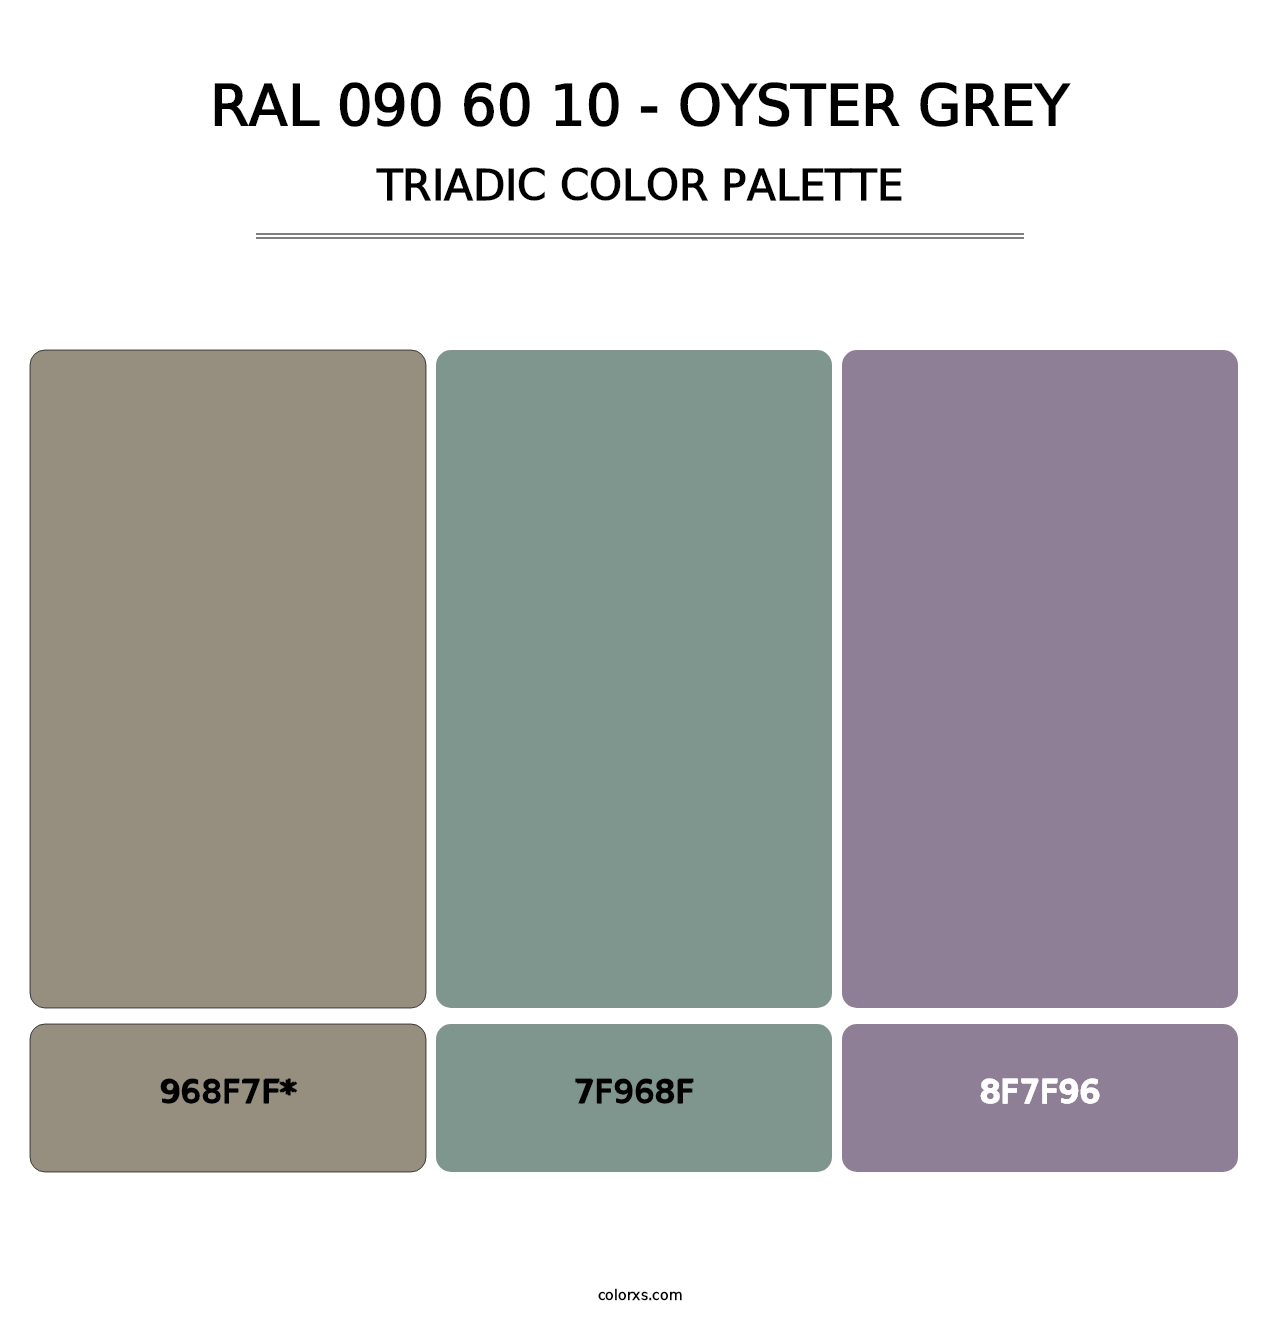 RAL 090 60 10 - Oyster Grey - Triadic Color Palette